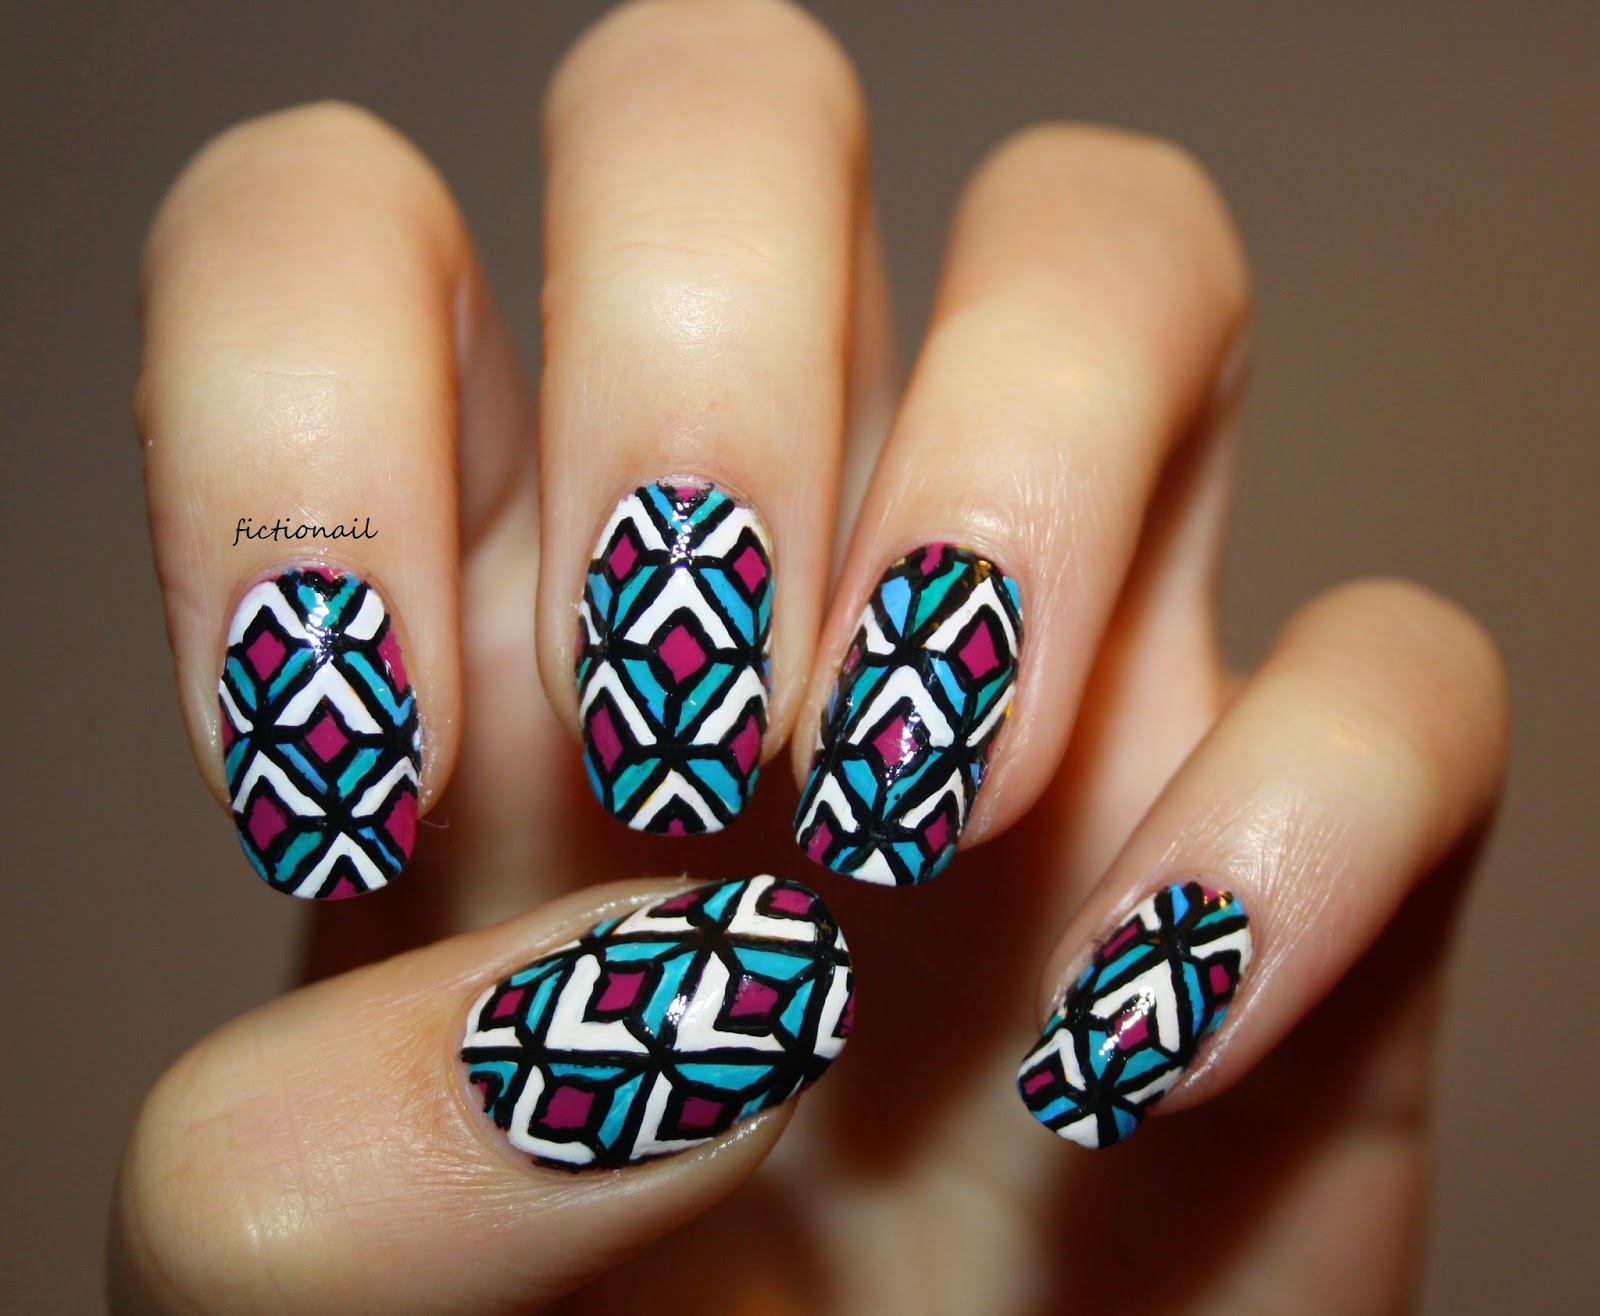 Geometric Nail Designs for Short Nails on Tumblr - wide 6